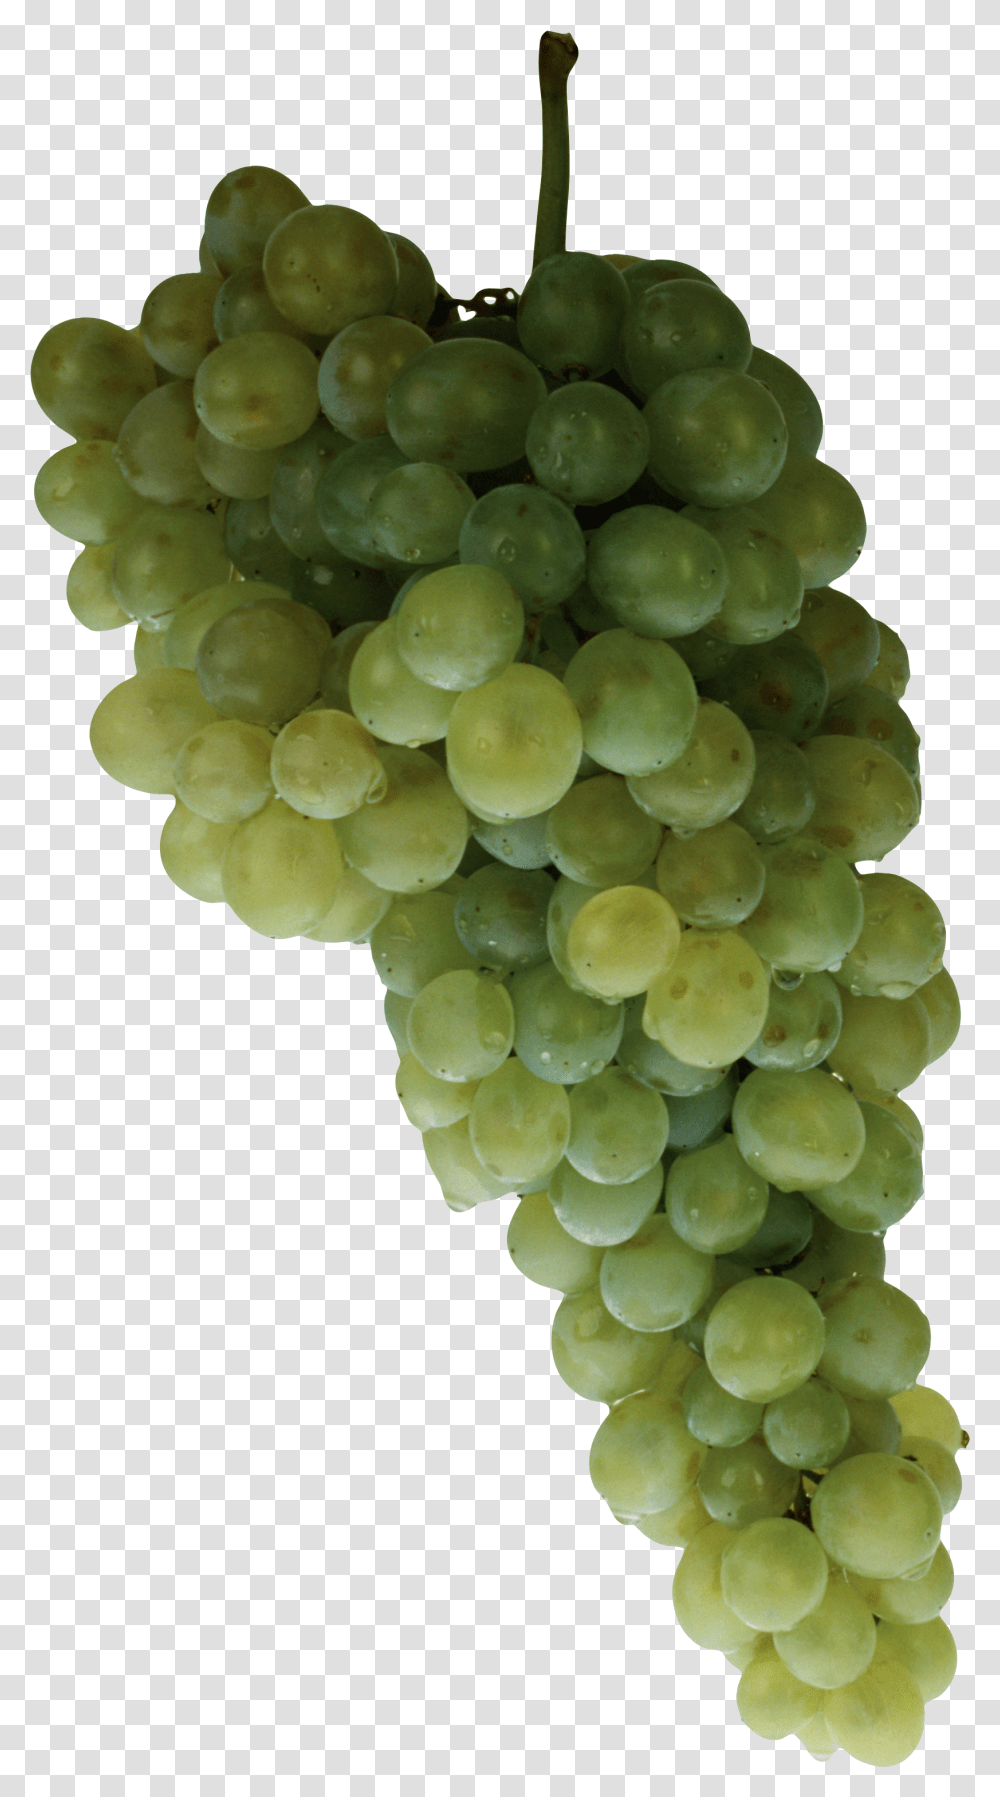 Green Grape Image Background Grapes Hd Images Transparent Png